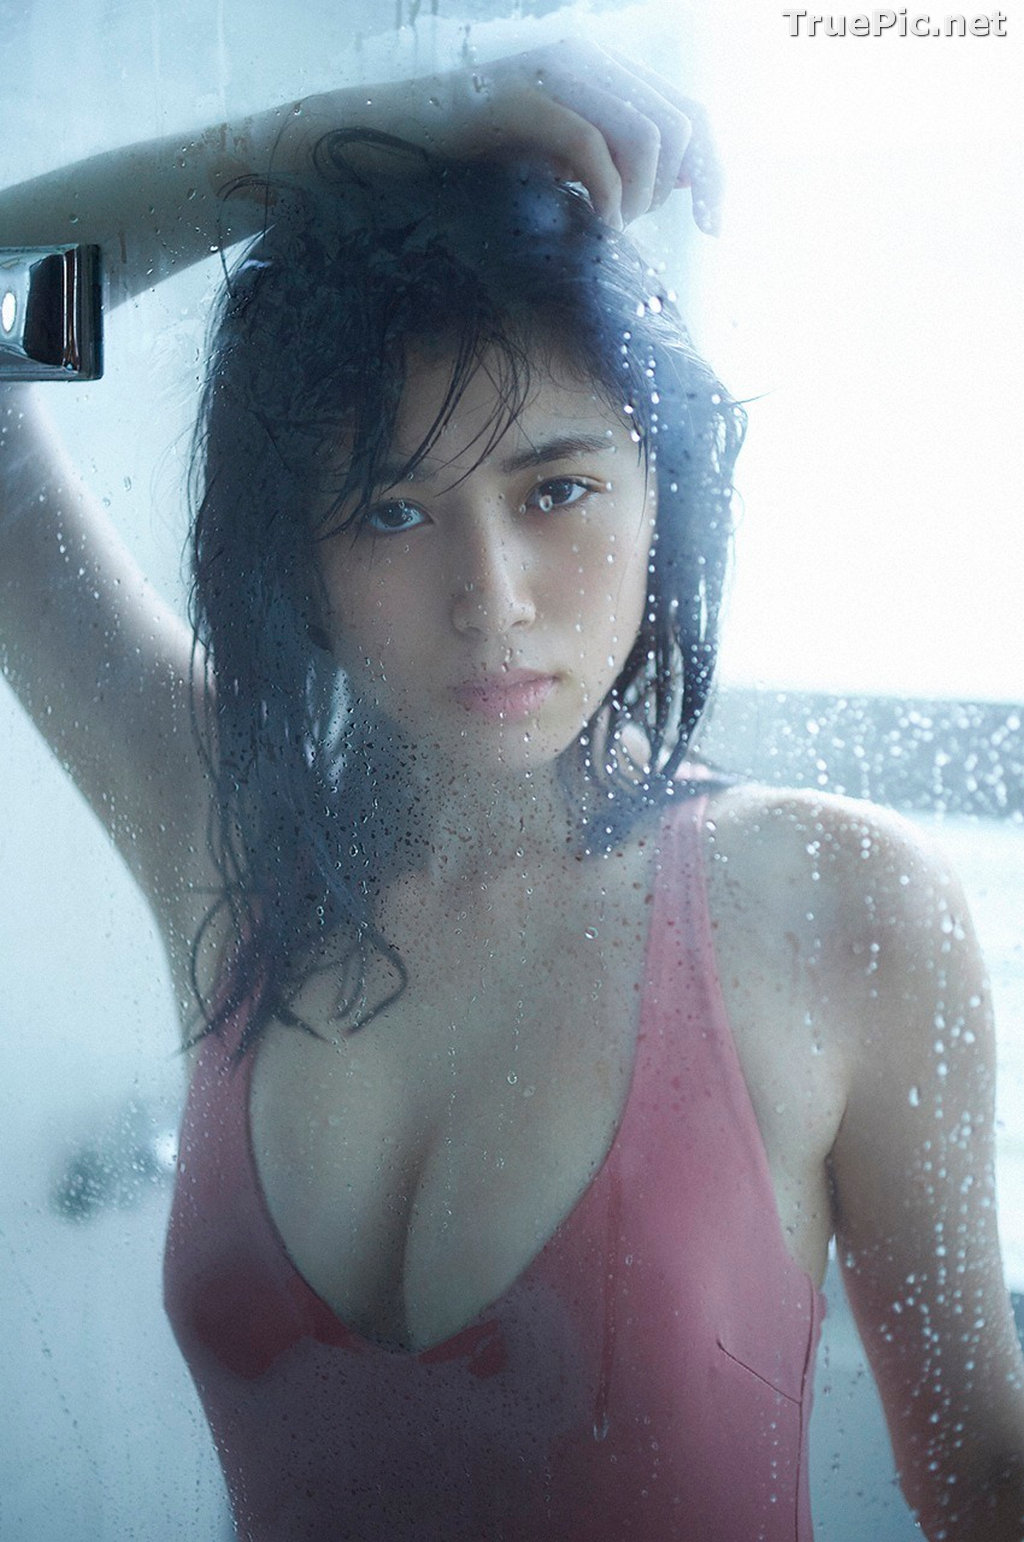 ImageJapanese Gravure Idol and Actress - Kitamuki Miyu (北向珠夕) - Sexy Picture Collection 2020 - TruePic.net - Picture-184